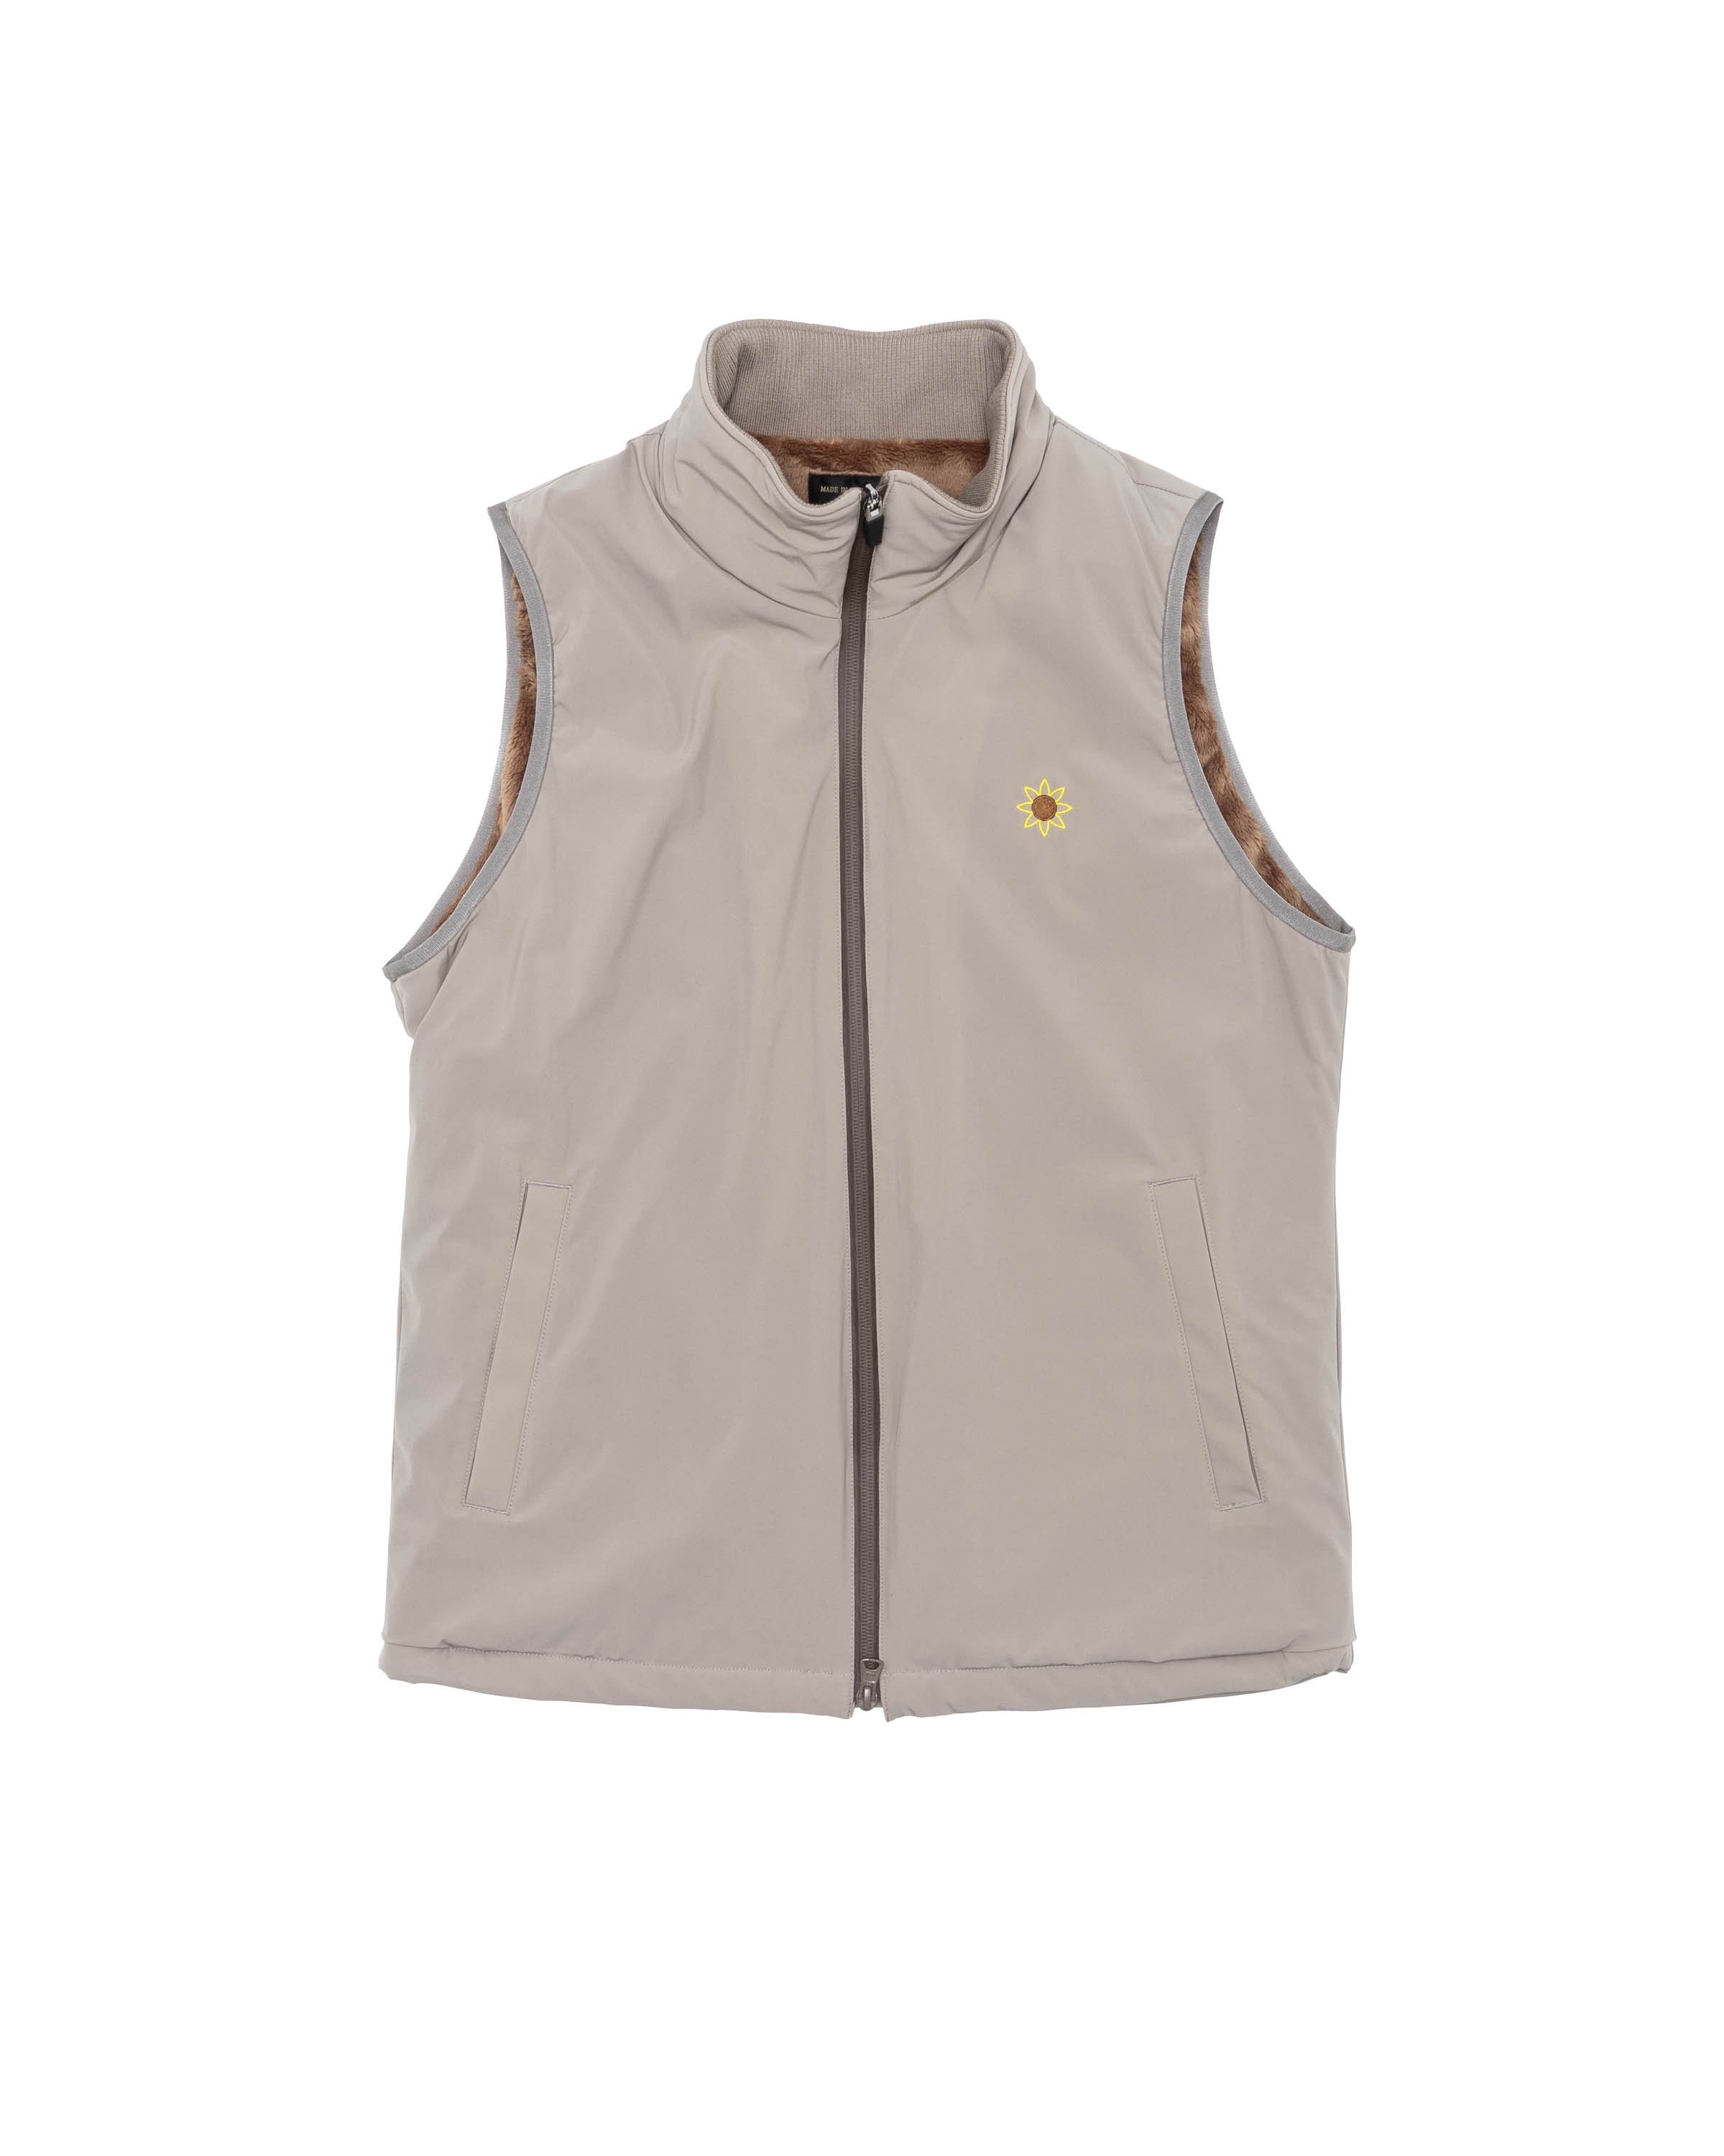 <img class='new_mark_img1' src='https://img.shop-pro.jp/img/new/icons14.gif' style='border:none;display:inline;margin:0px;padding:0px;width:auto;' />FUR VEST<br />beige